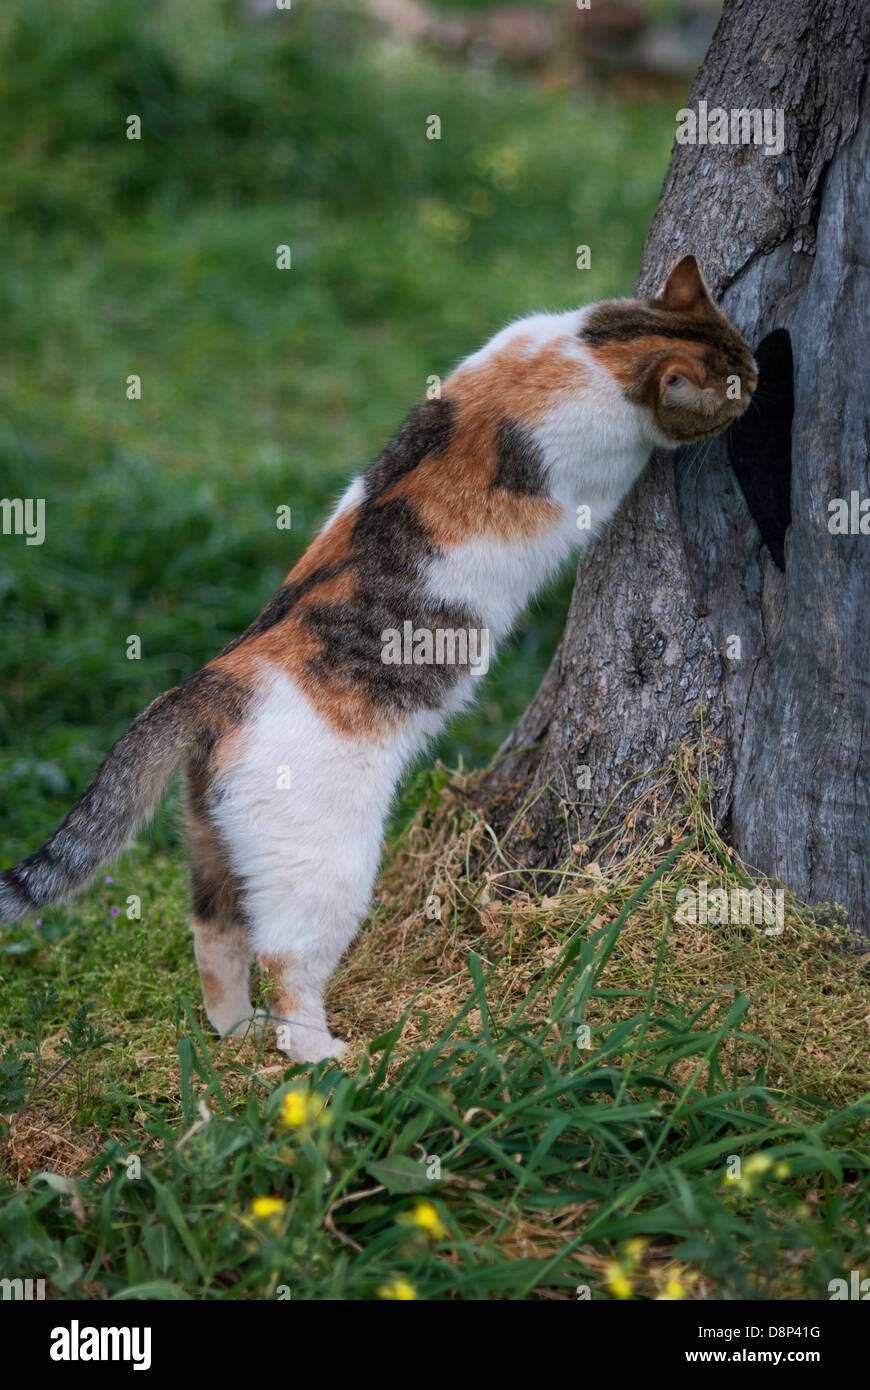 Curious cat peeking into a hole in a tree trunk Stock Photo